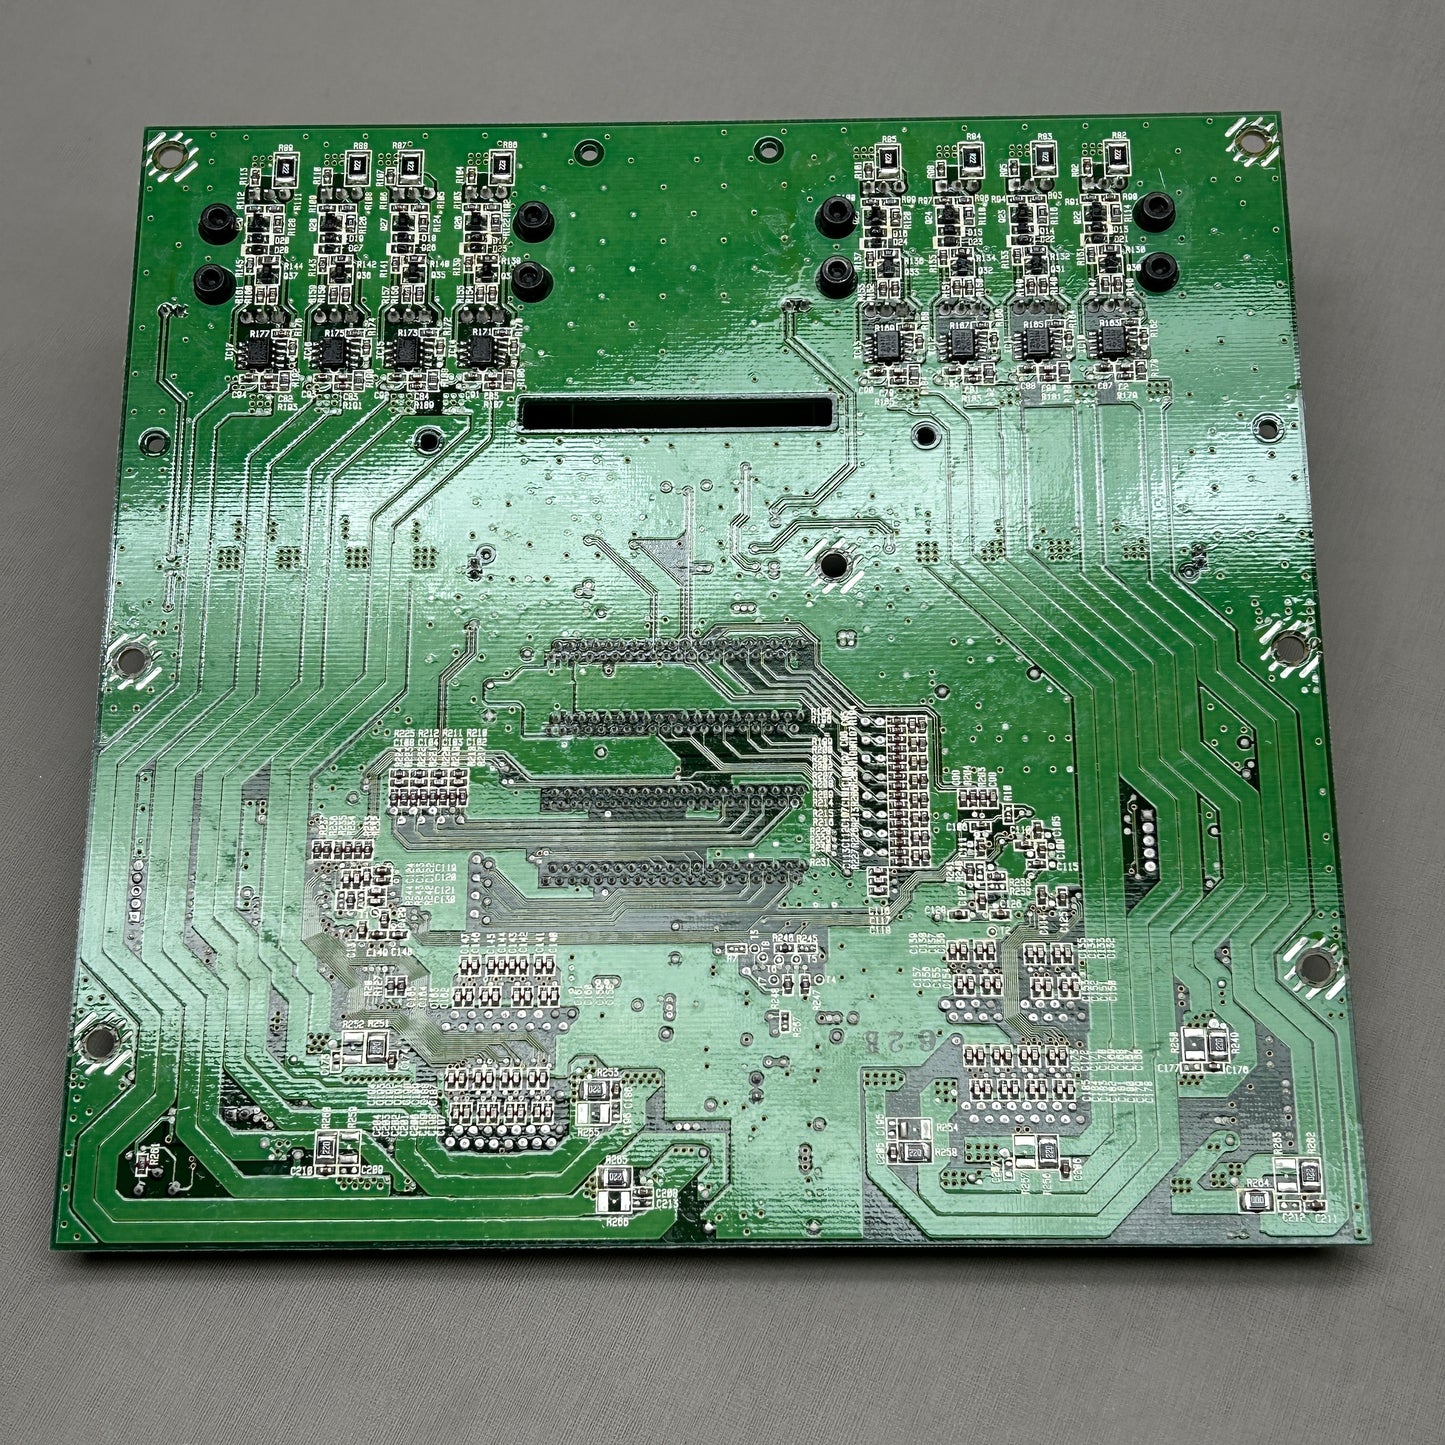 ROLAND ASSY Print Carriage Board VG-640_01 6000002185 (New)